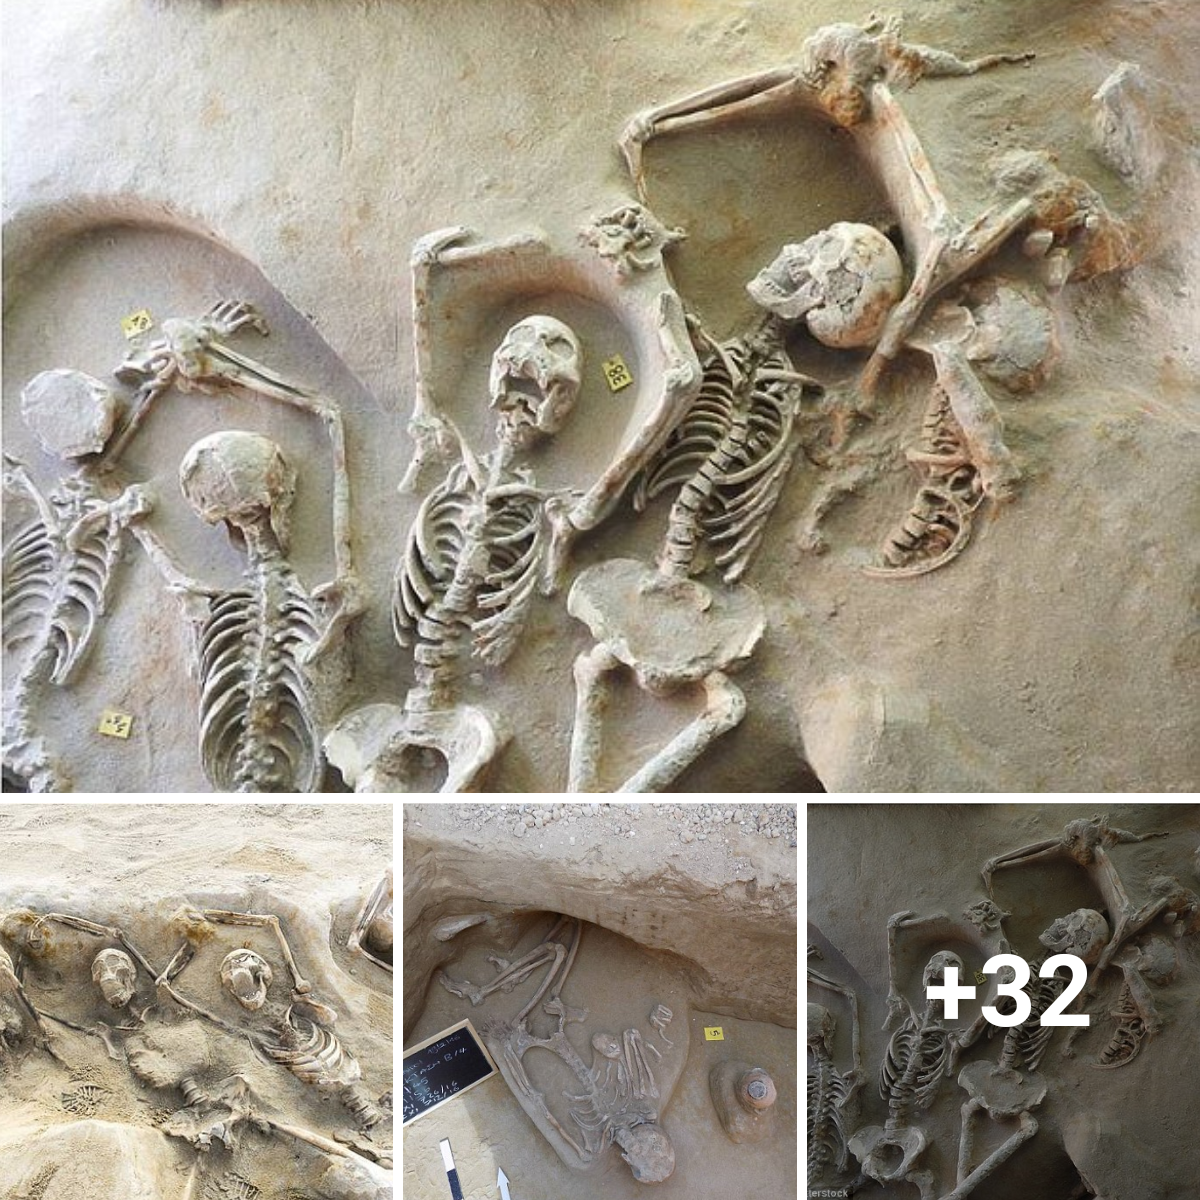 Eighty bones with their wrists bound above their heads have been found, and this discovery may represent a chapter in Greek history — rebels who attempted a coup in the seventh century BC.